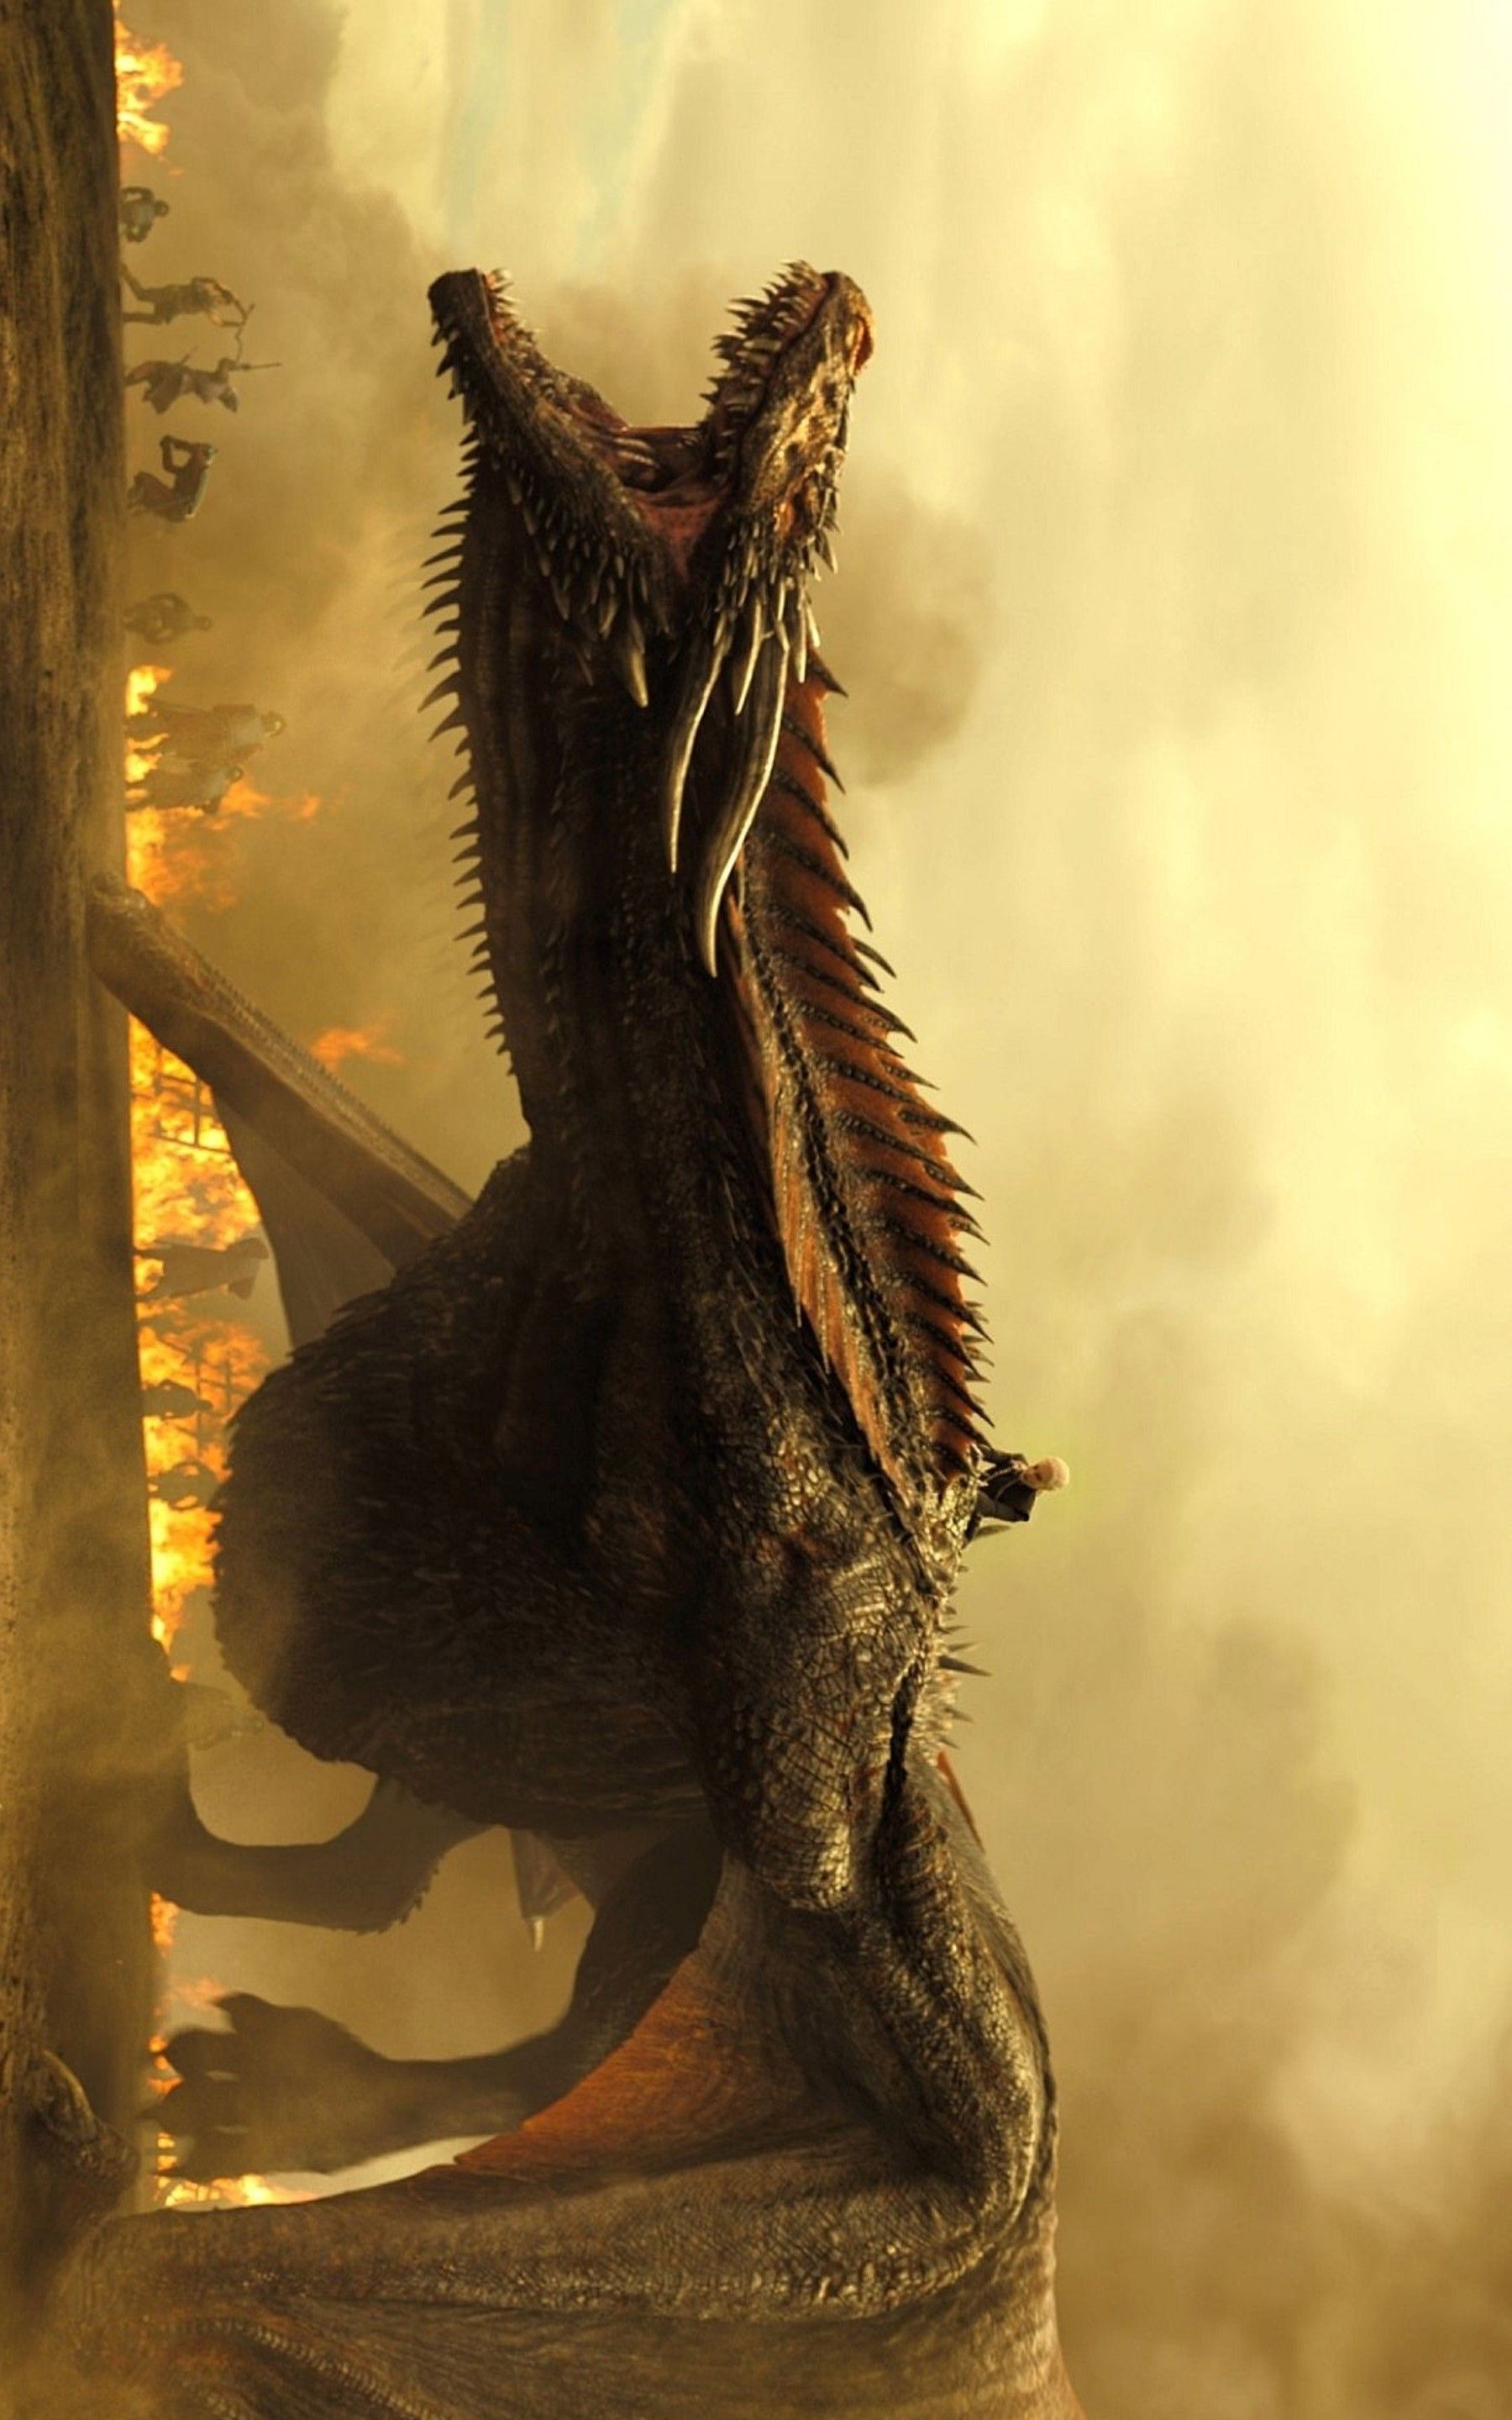 Game of Thrones Dragon Wallpaper (82+ images)